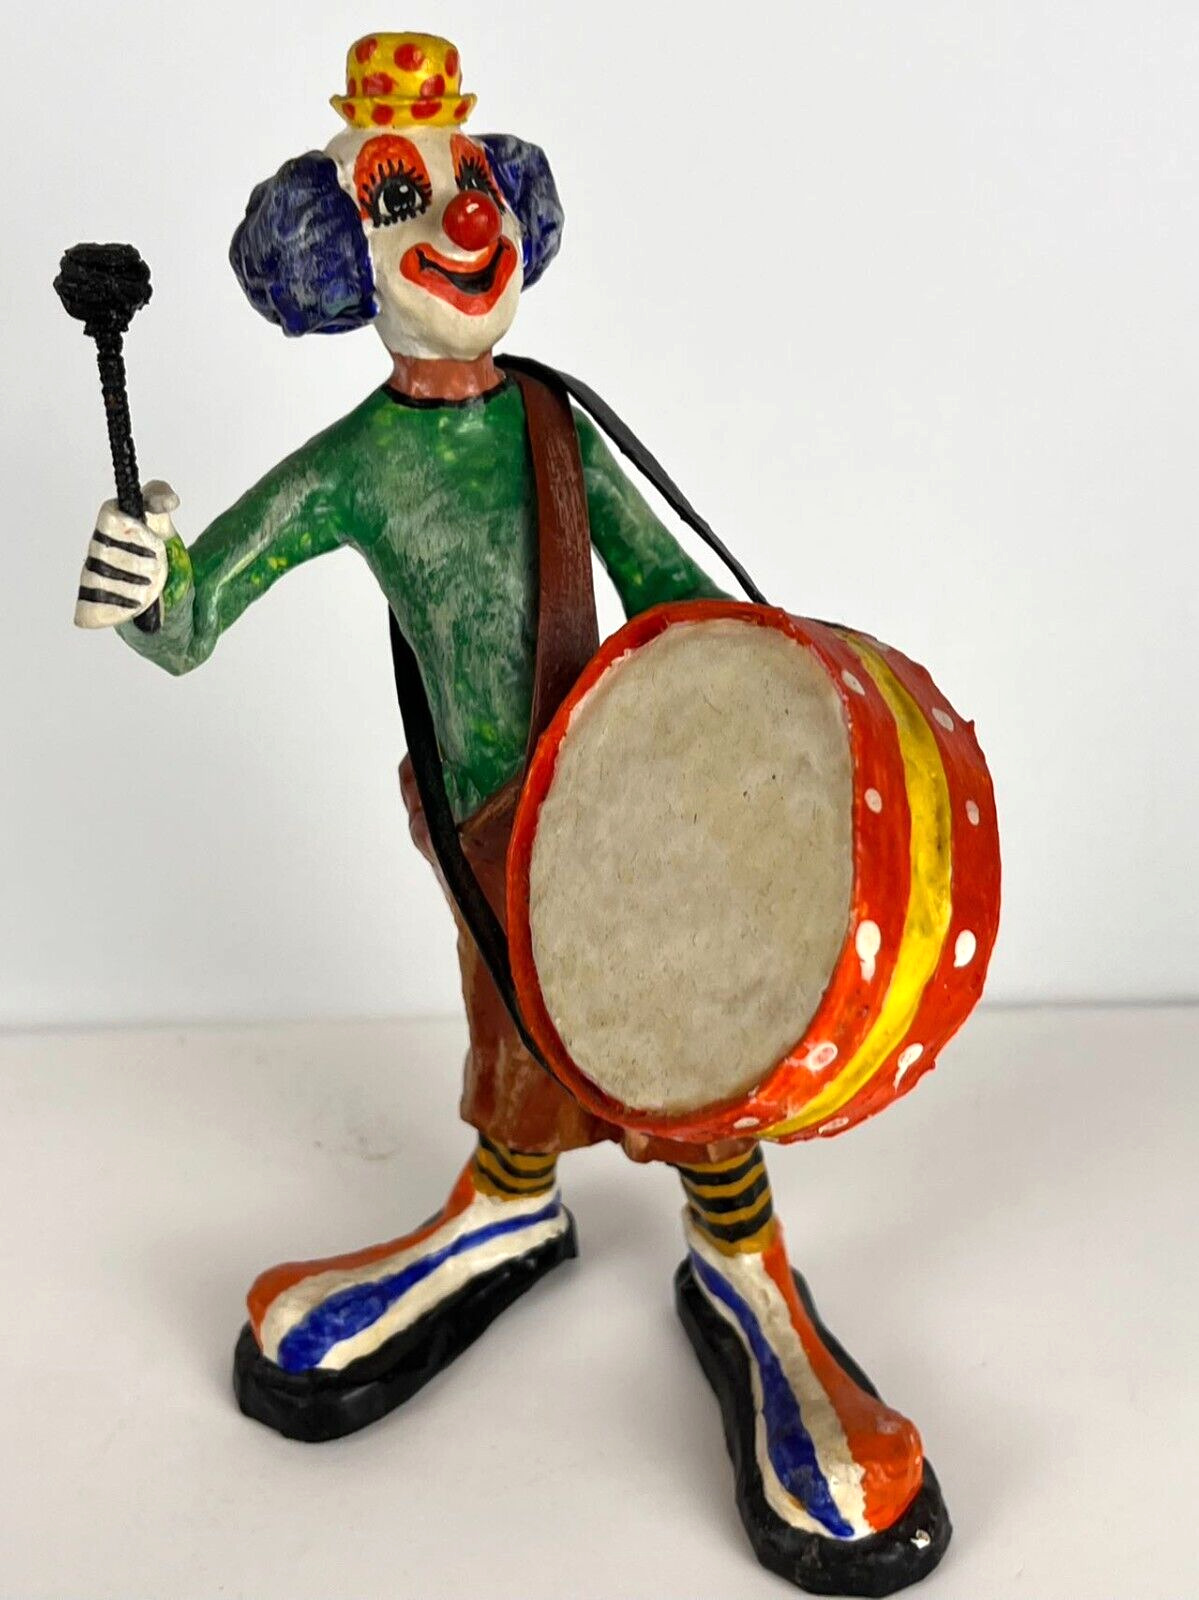 Vtg Handcrafted Paper Mache Colorful Clown Playing Drum Folk Art Mexico, Signed